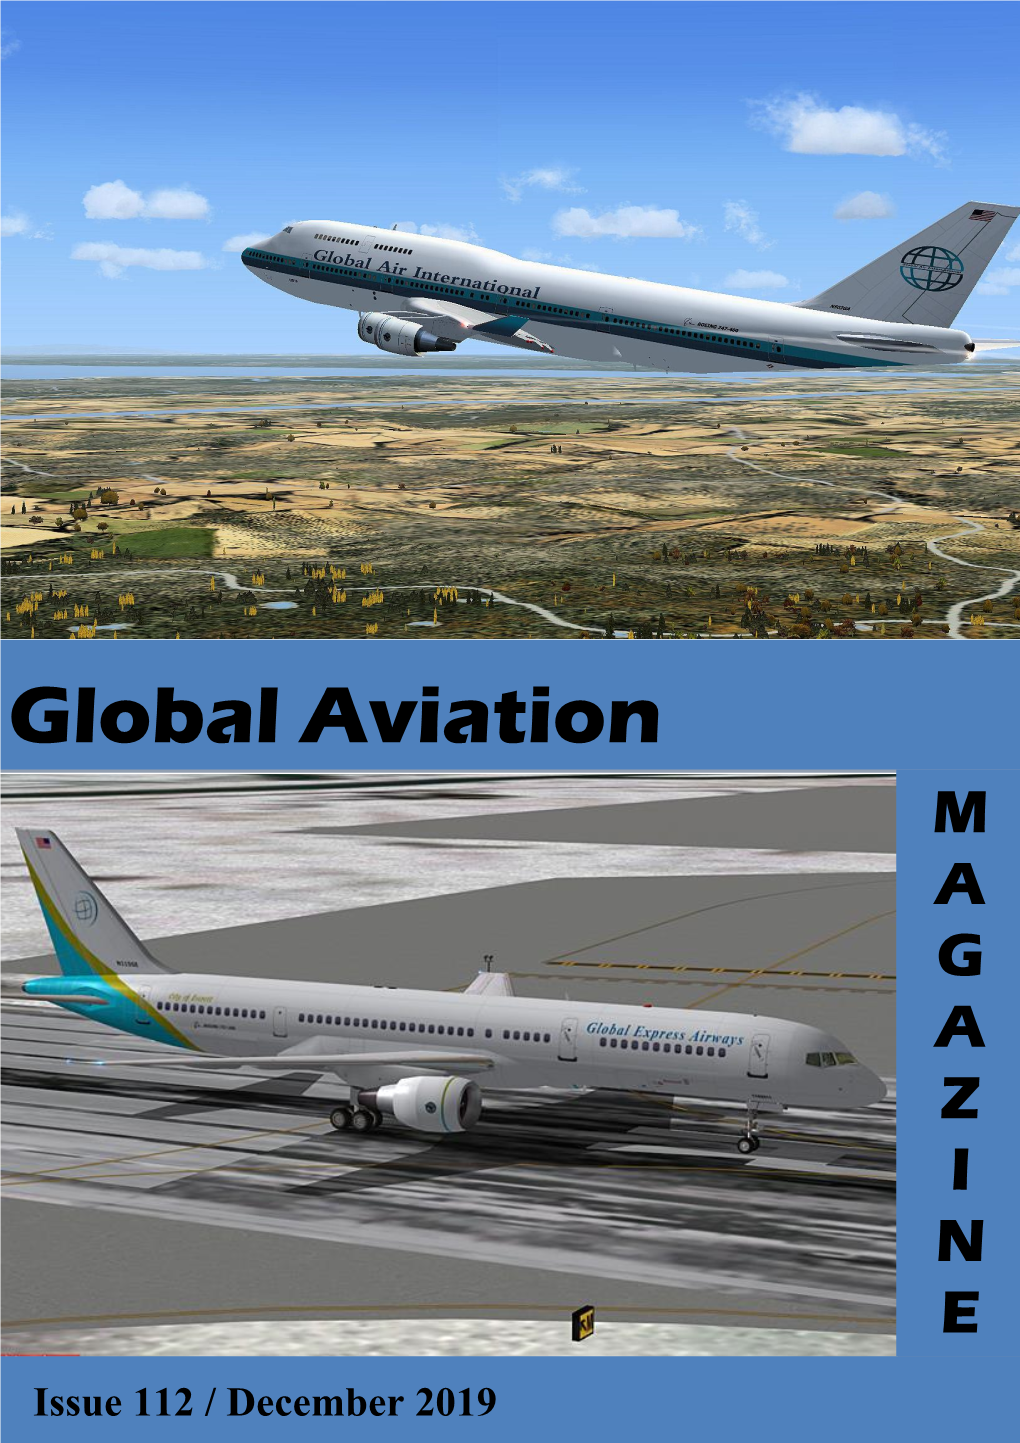 Introducing the Mcdonnell Douglas MD-11F